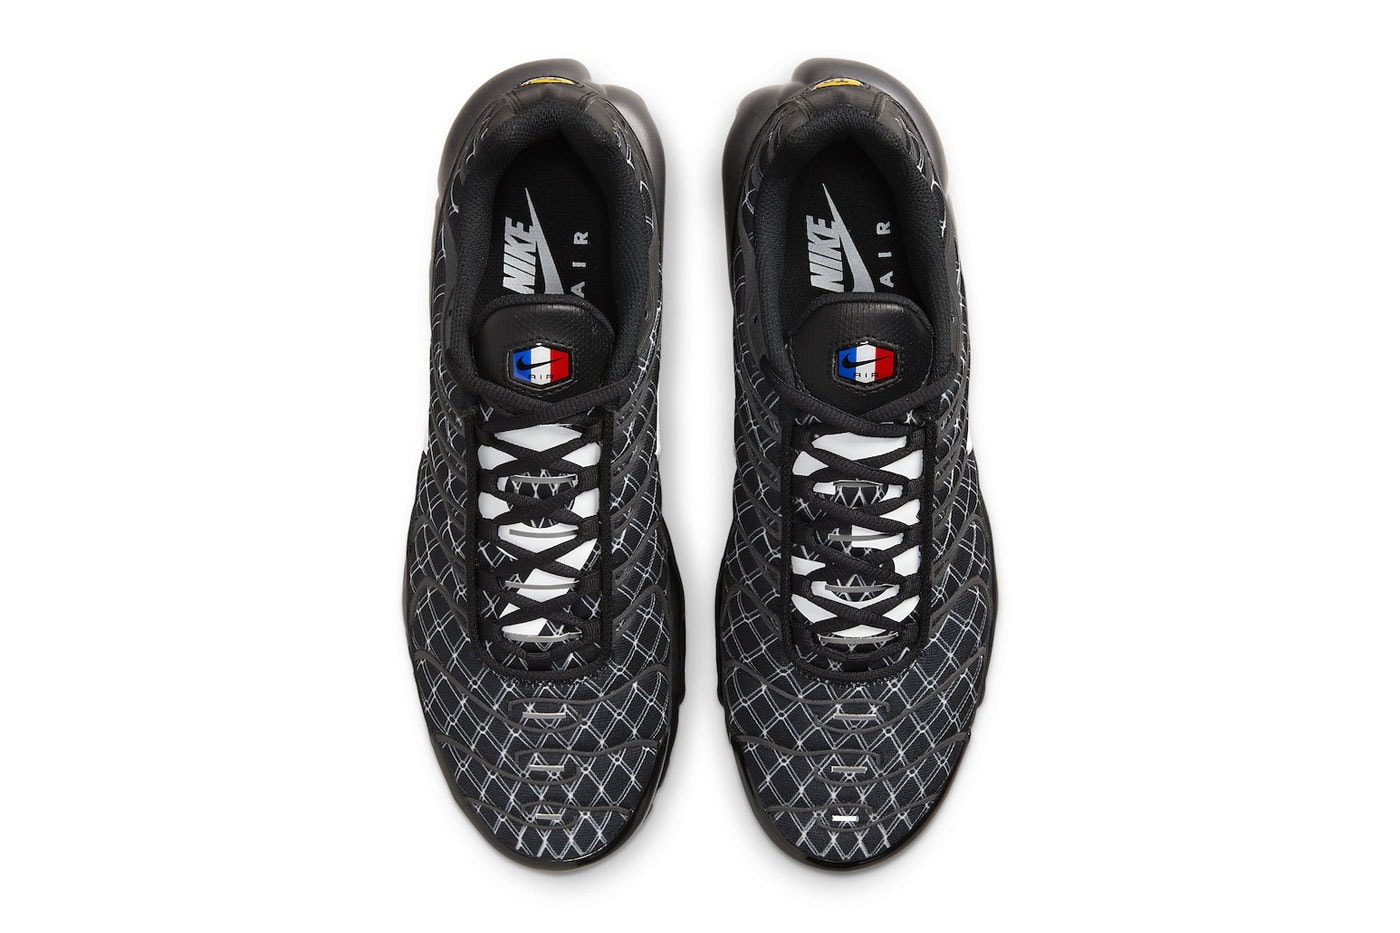 Nike Air Max Plus "France" Official Images Sneakers Release Price Info